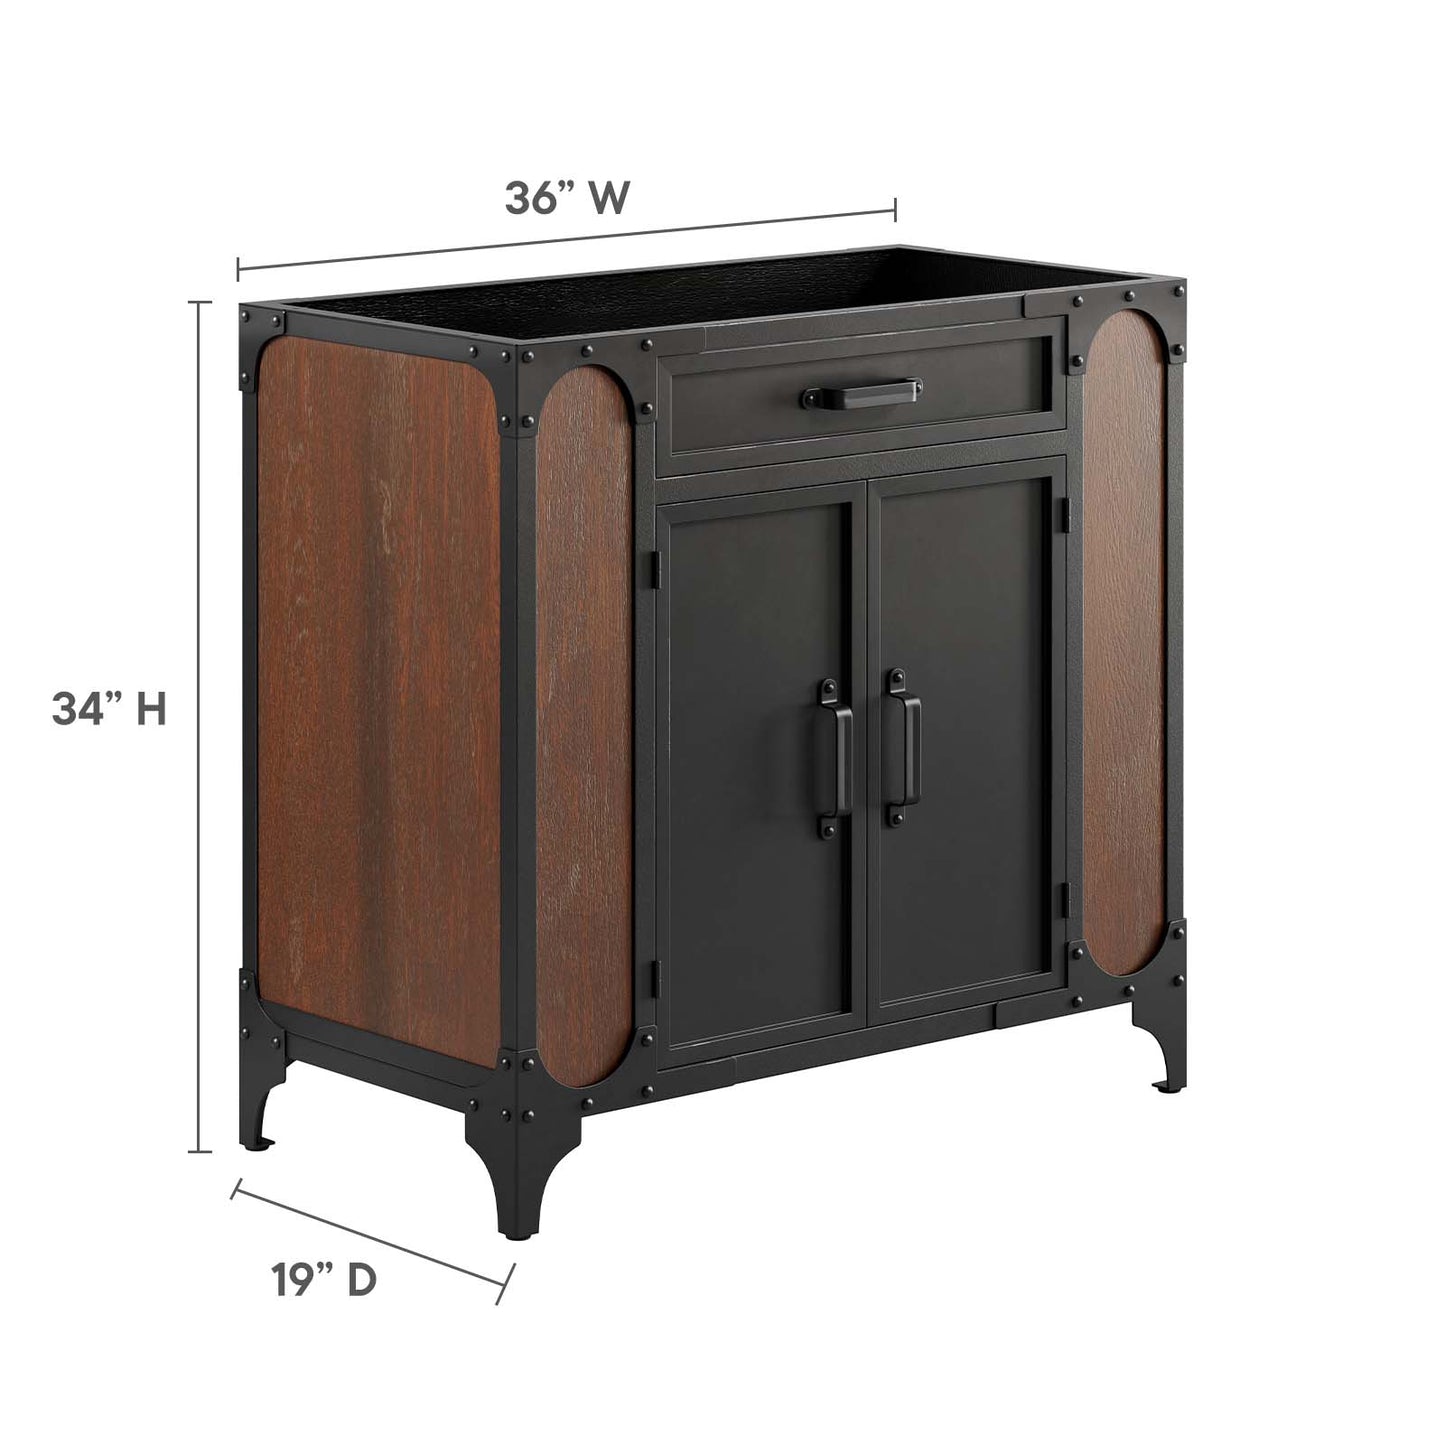 Steamforge 36" Bathroom Vanity Cabinet (Sink Basin Not Included) By Modway - EEI-6129 | Bathroom Accessories | Modway - 7